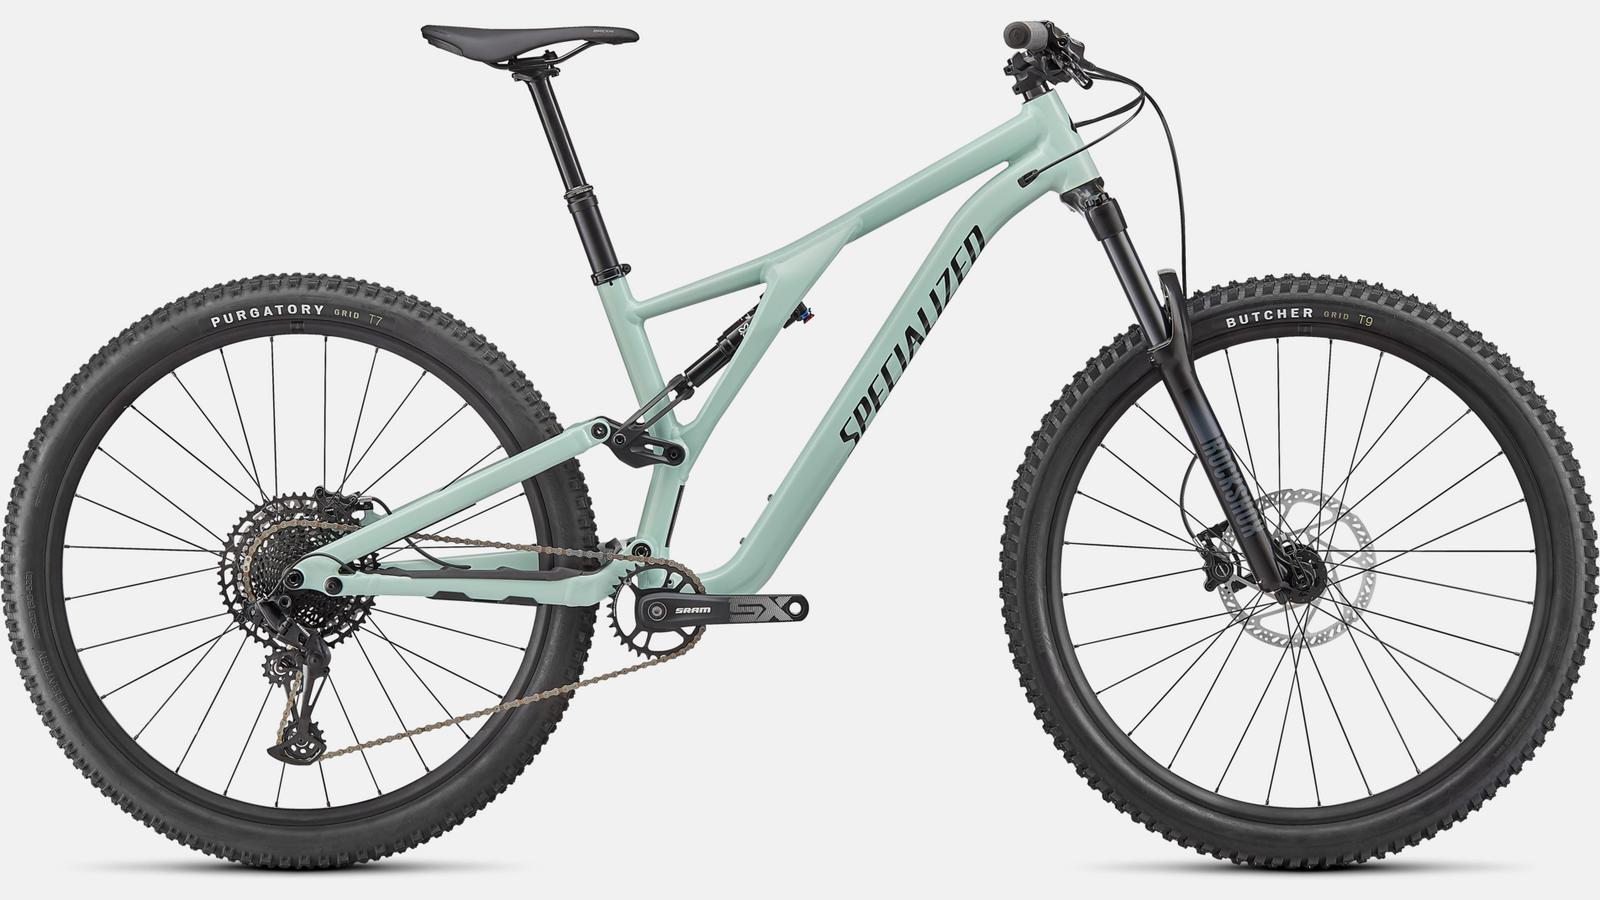 Paint for 2022 Specialized Stumpjumper Alloy - Gloss White Sage